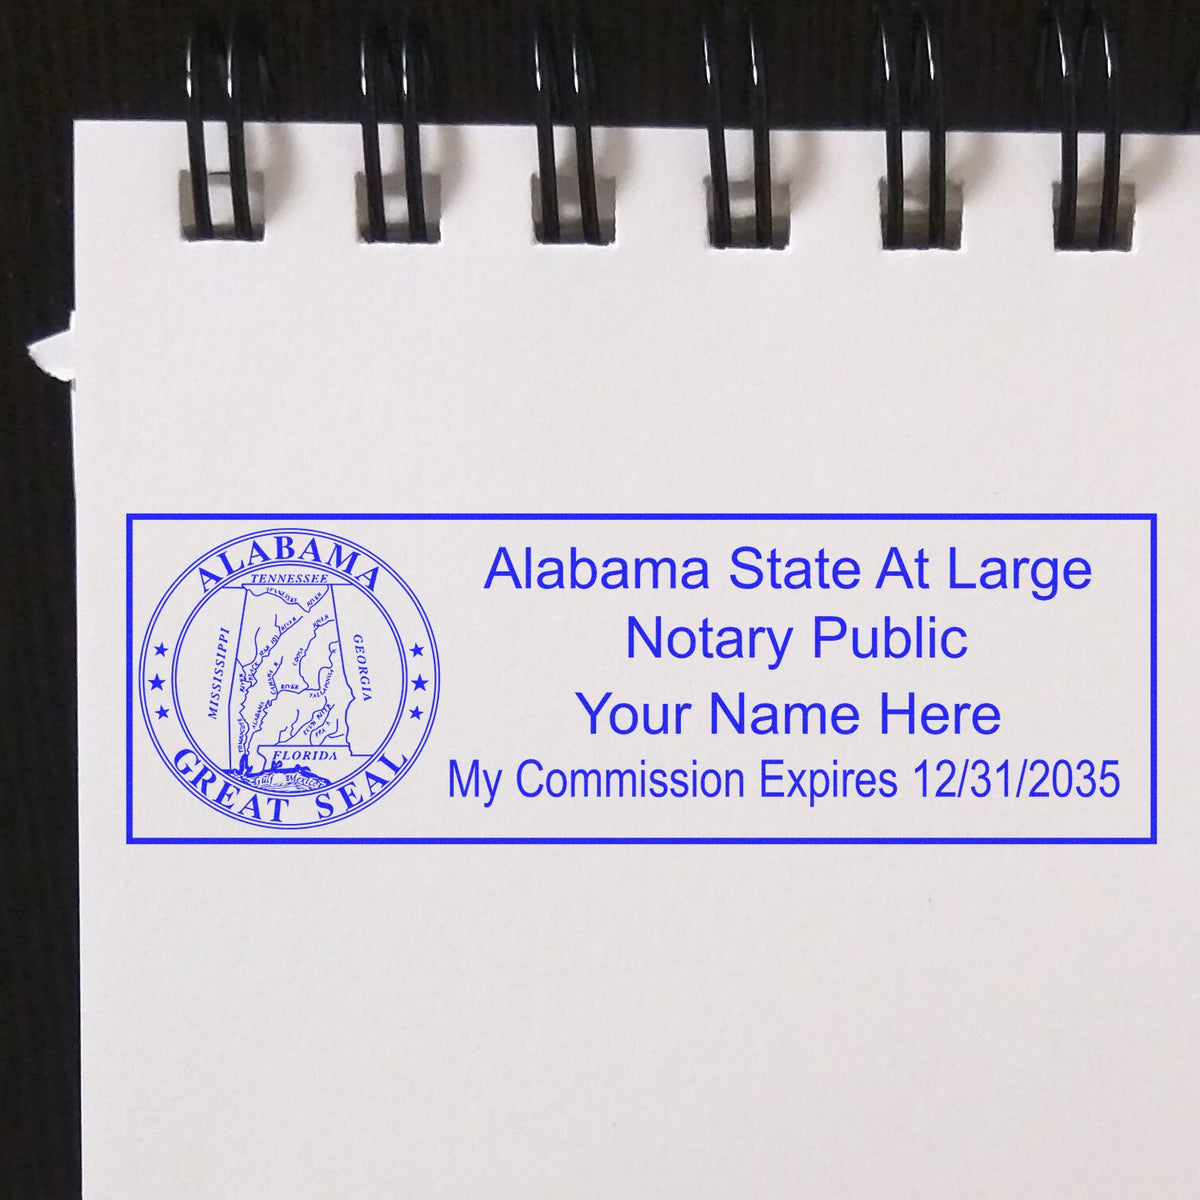 The PSI Alabama Notary Stamp stamp impression comes to life with a crisp, detailed photo on paper - showcasing true professional quality.